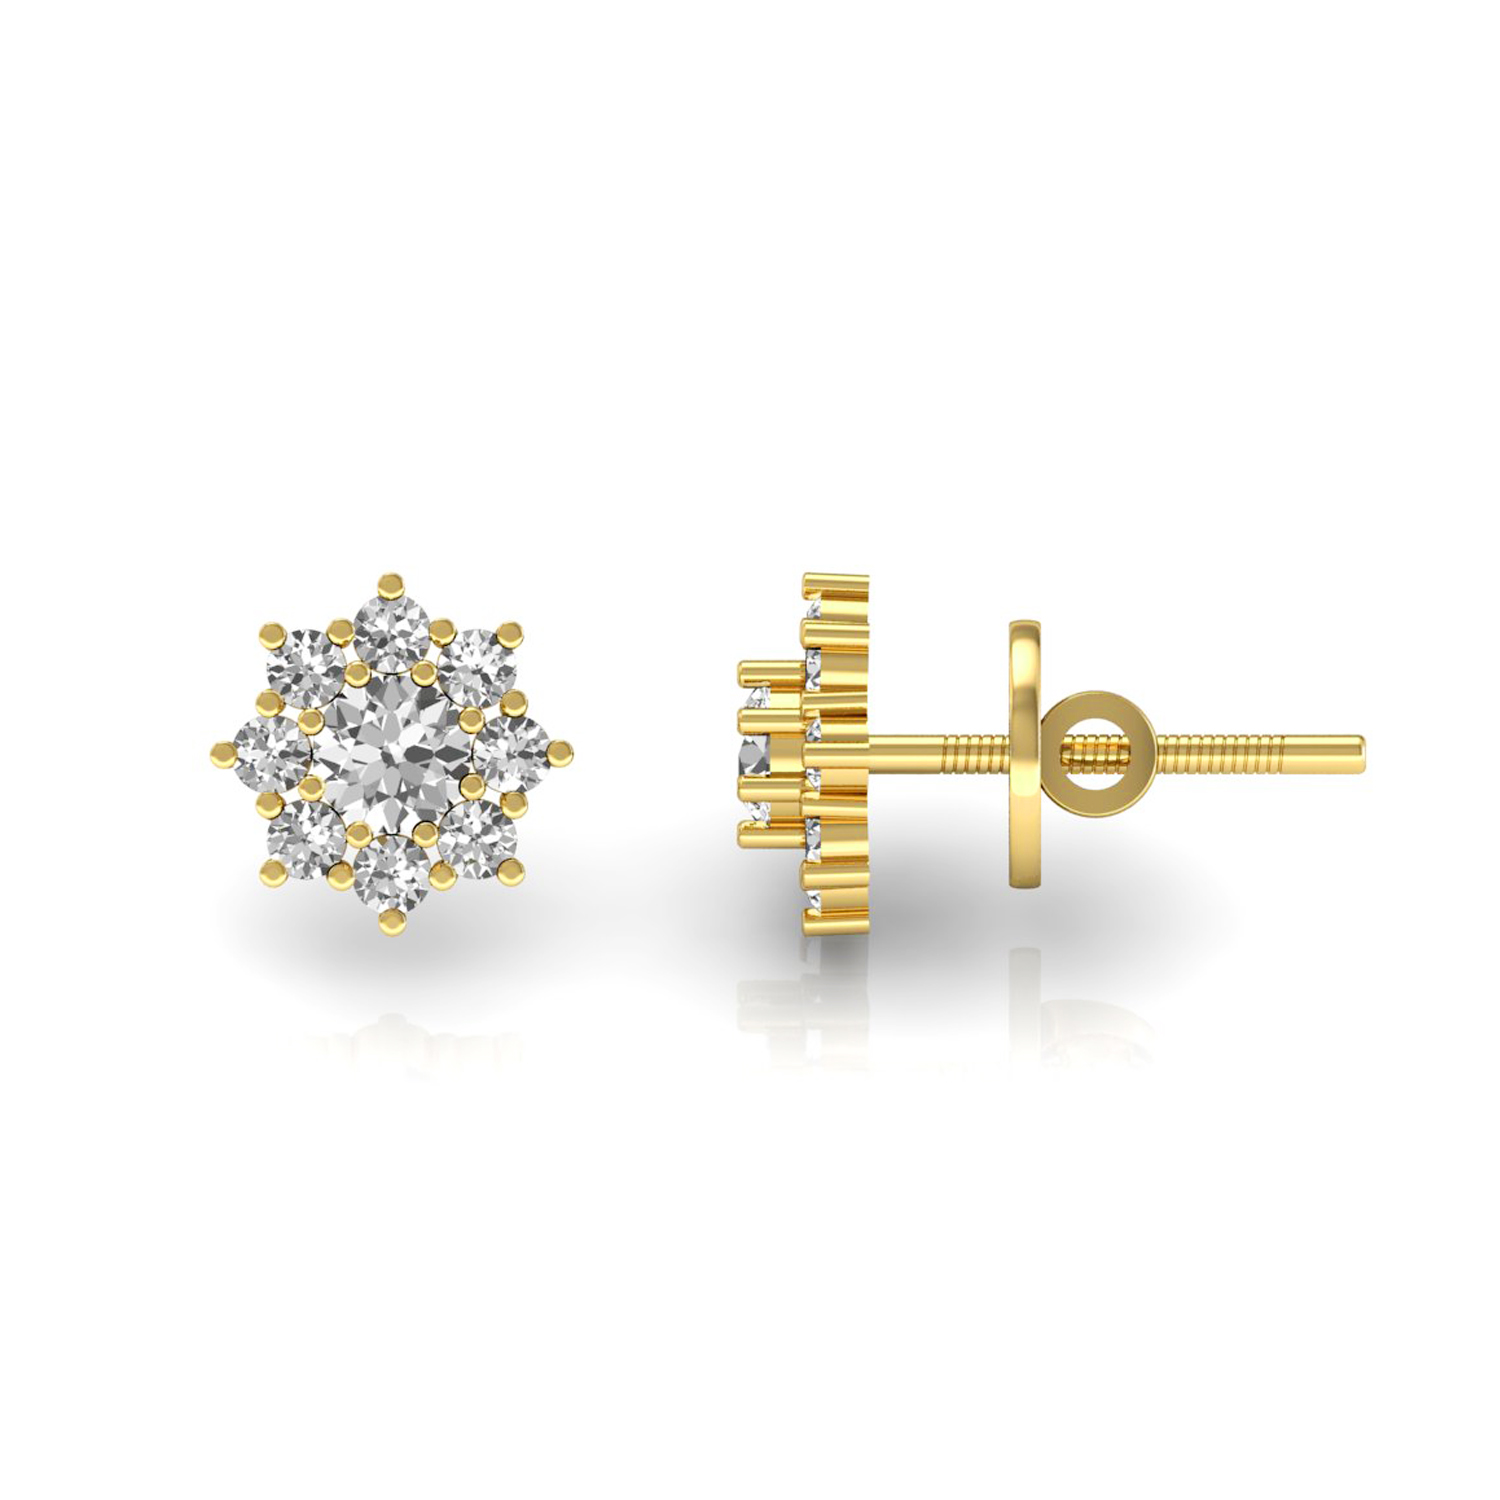 Floral Shape Solitaire Diamond Stud Earrings Solid Gold Jewelry